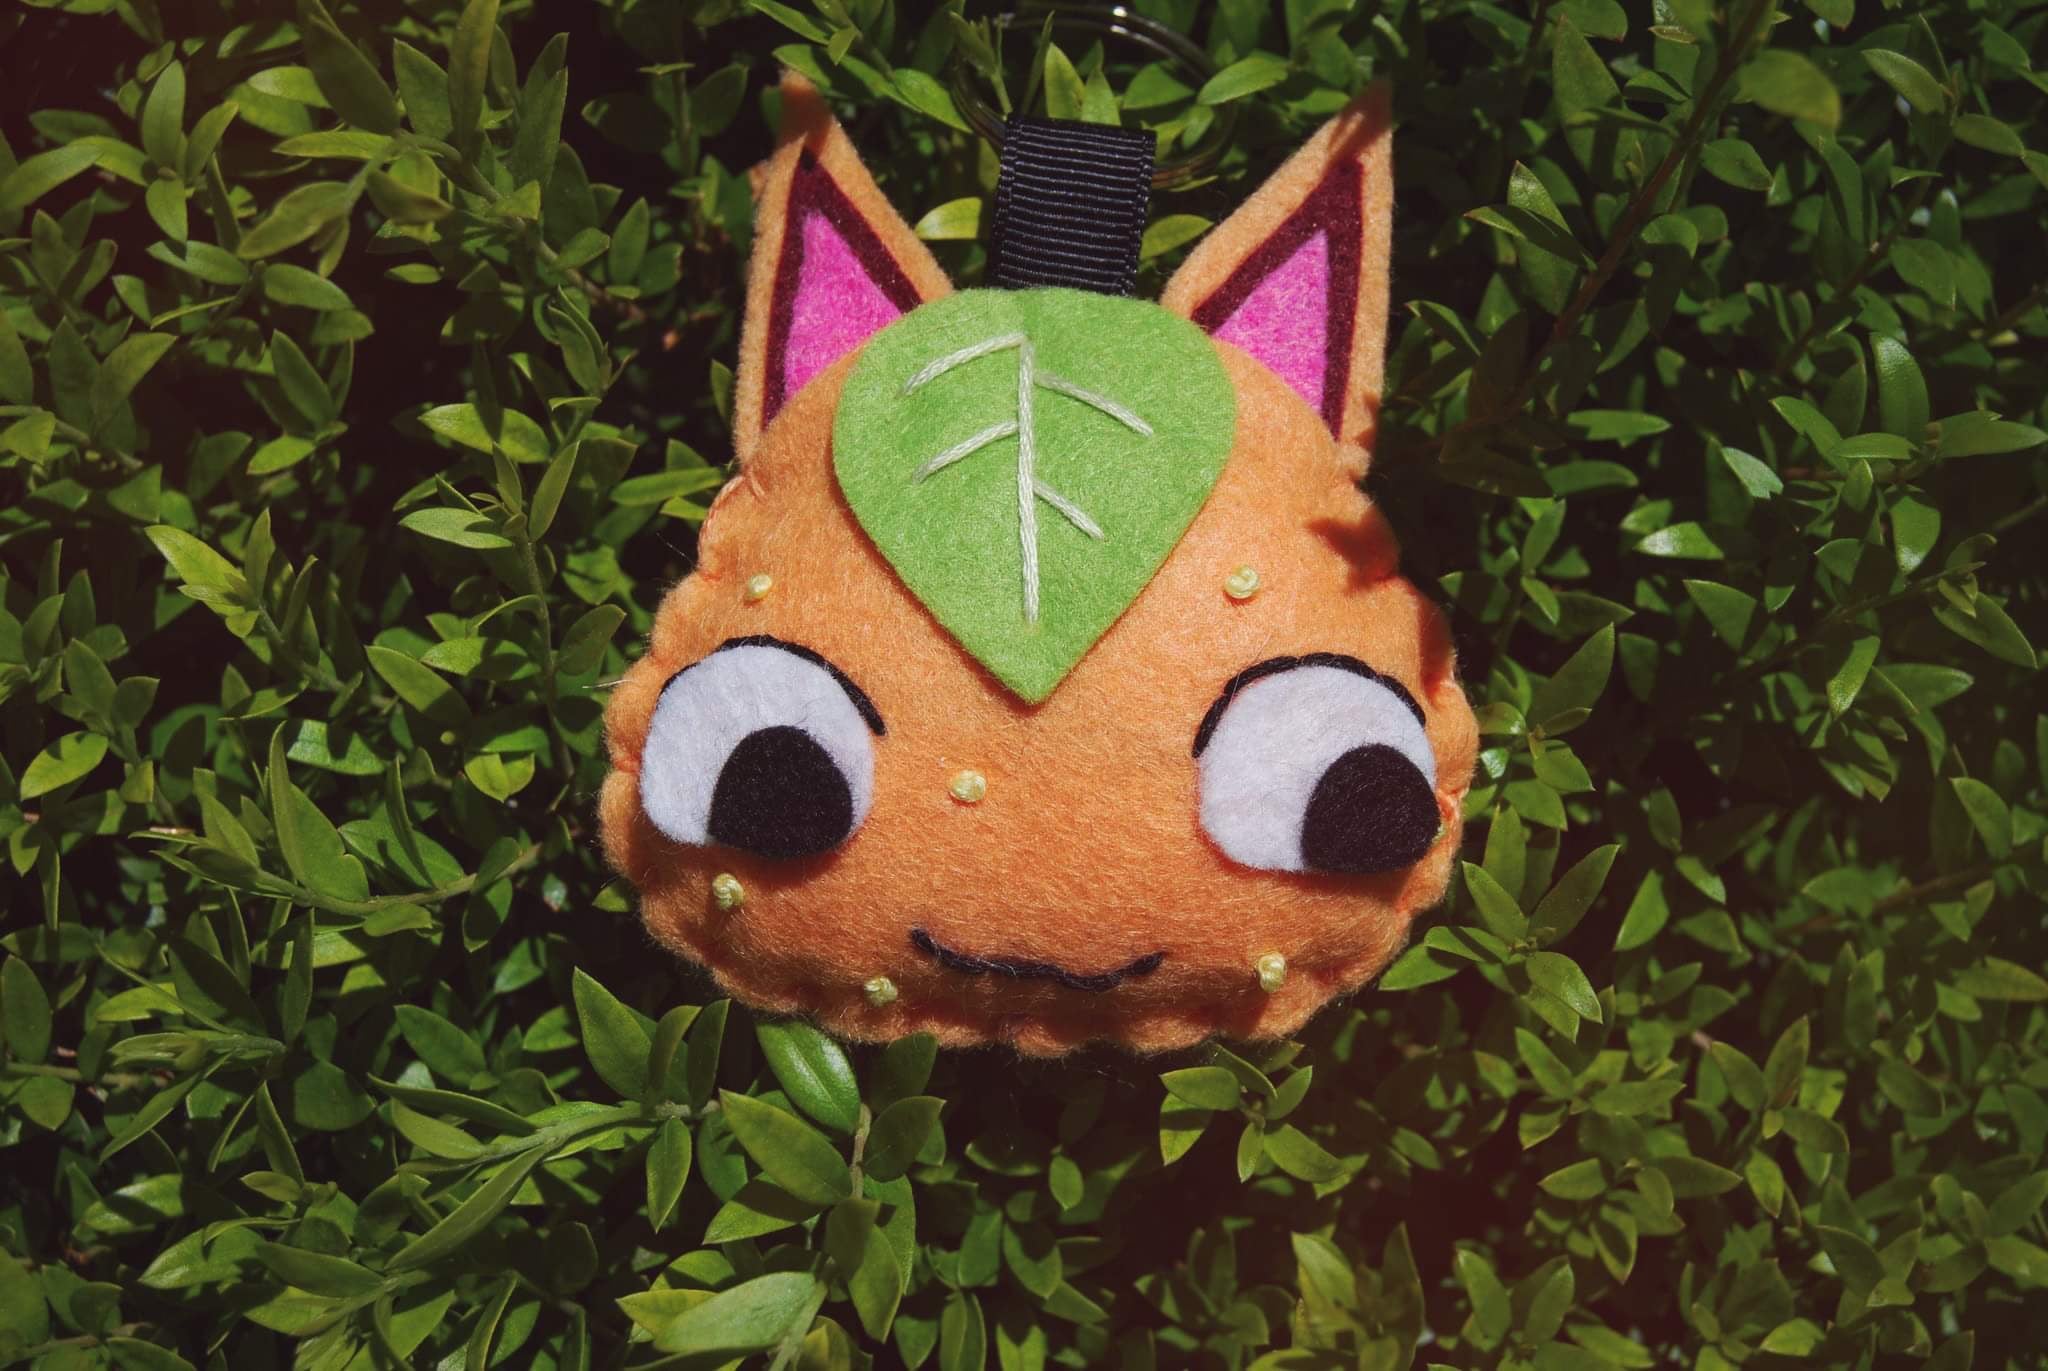 Tangy Keychain - Animal Crossing - ACNH